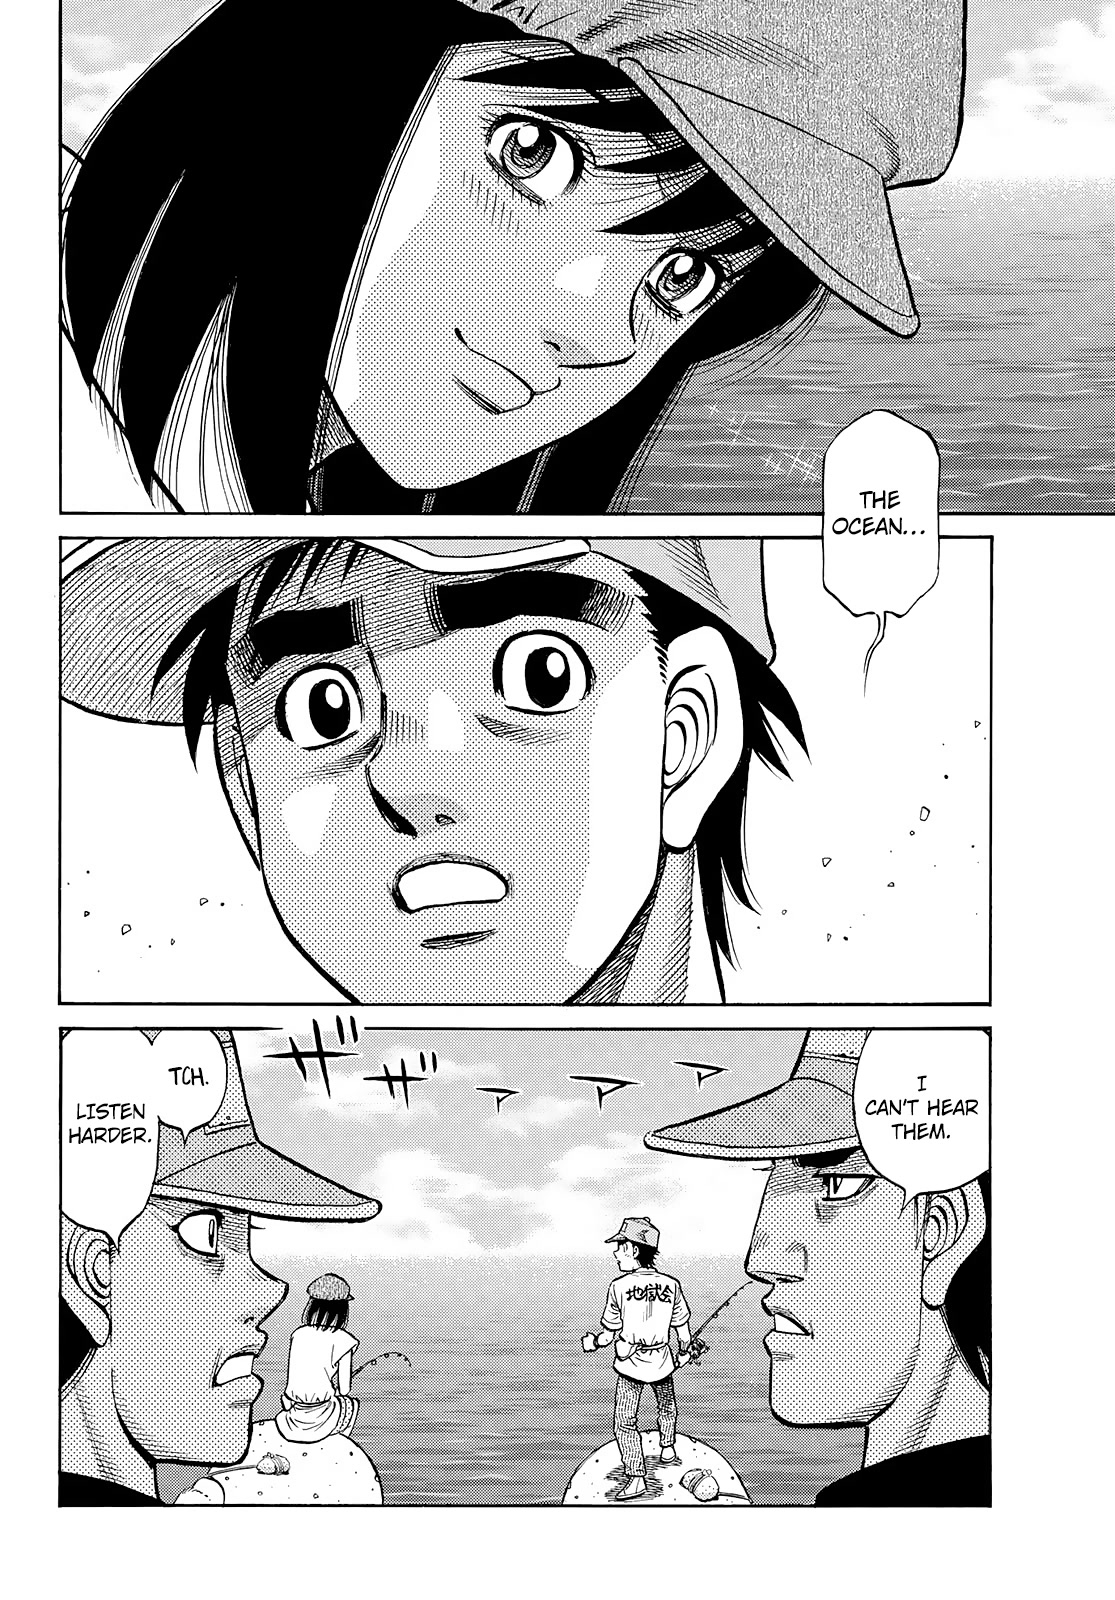 Hajime no Ippo, Chapter 1429 Shall We go to the Ocean image 03